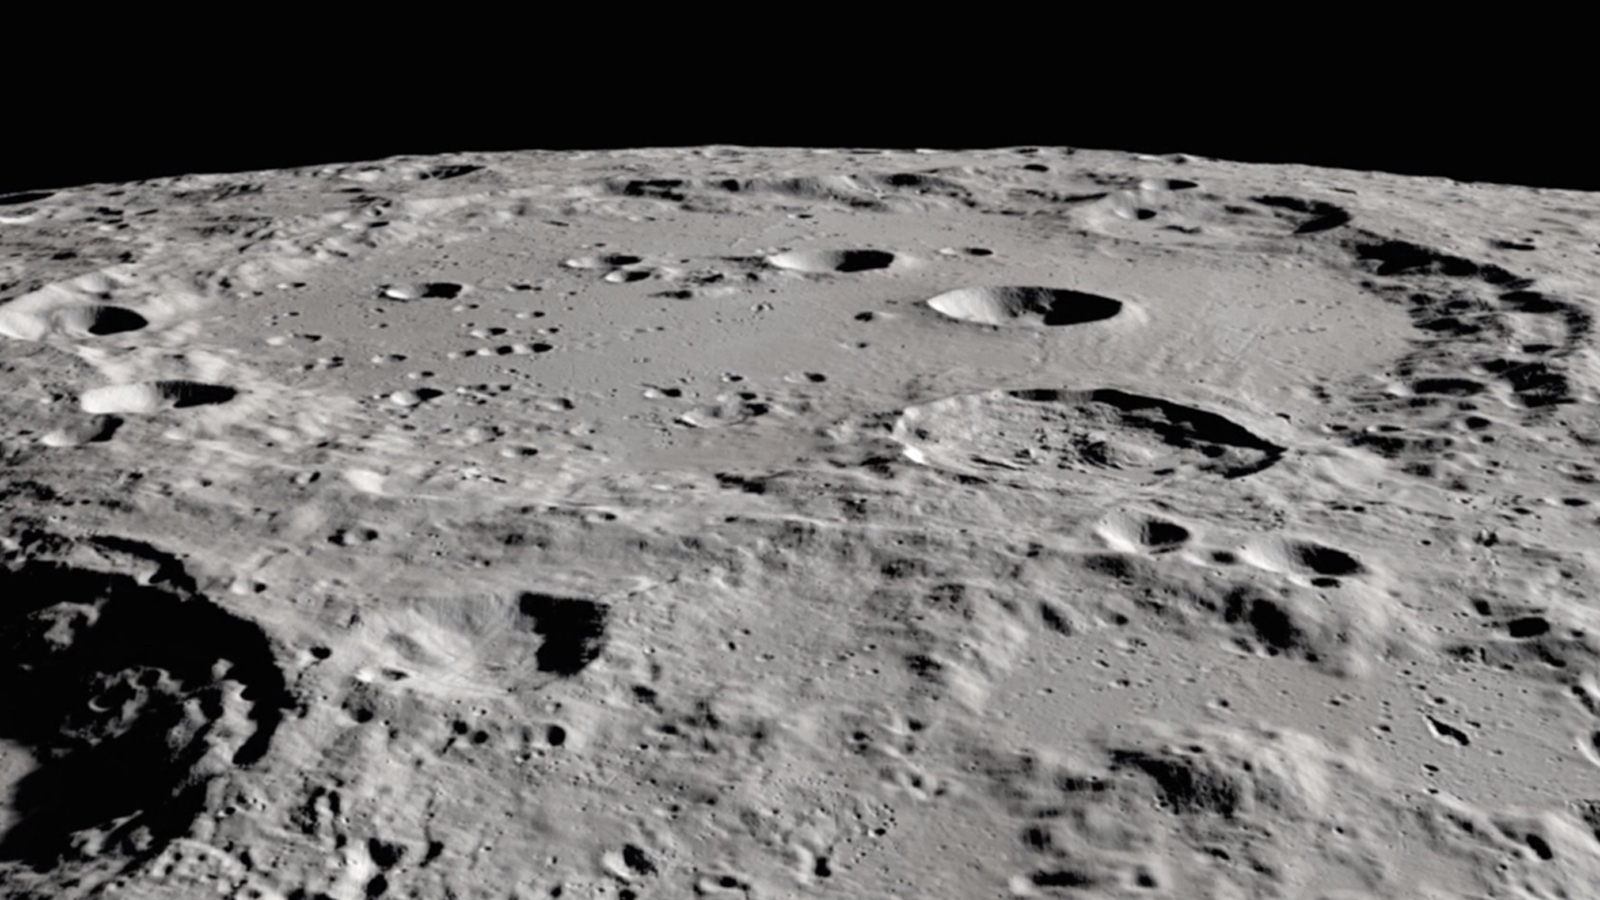 New NASA Findings Confirm Presence of Water on the Moon